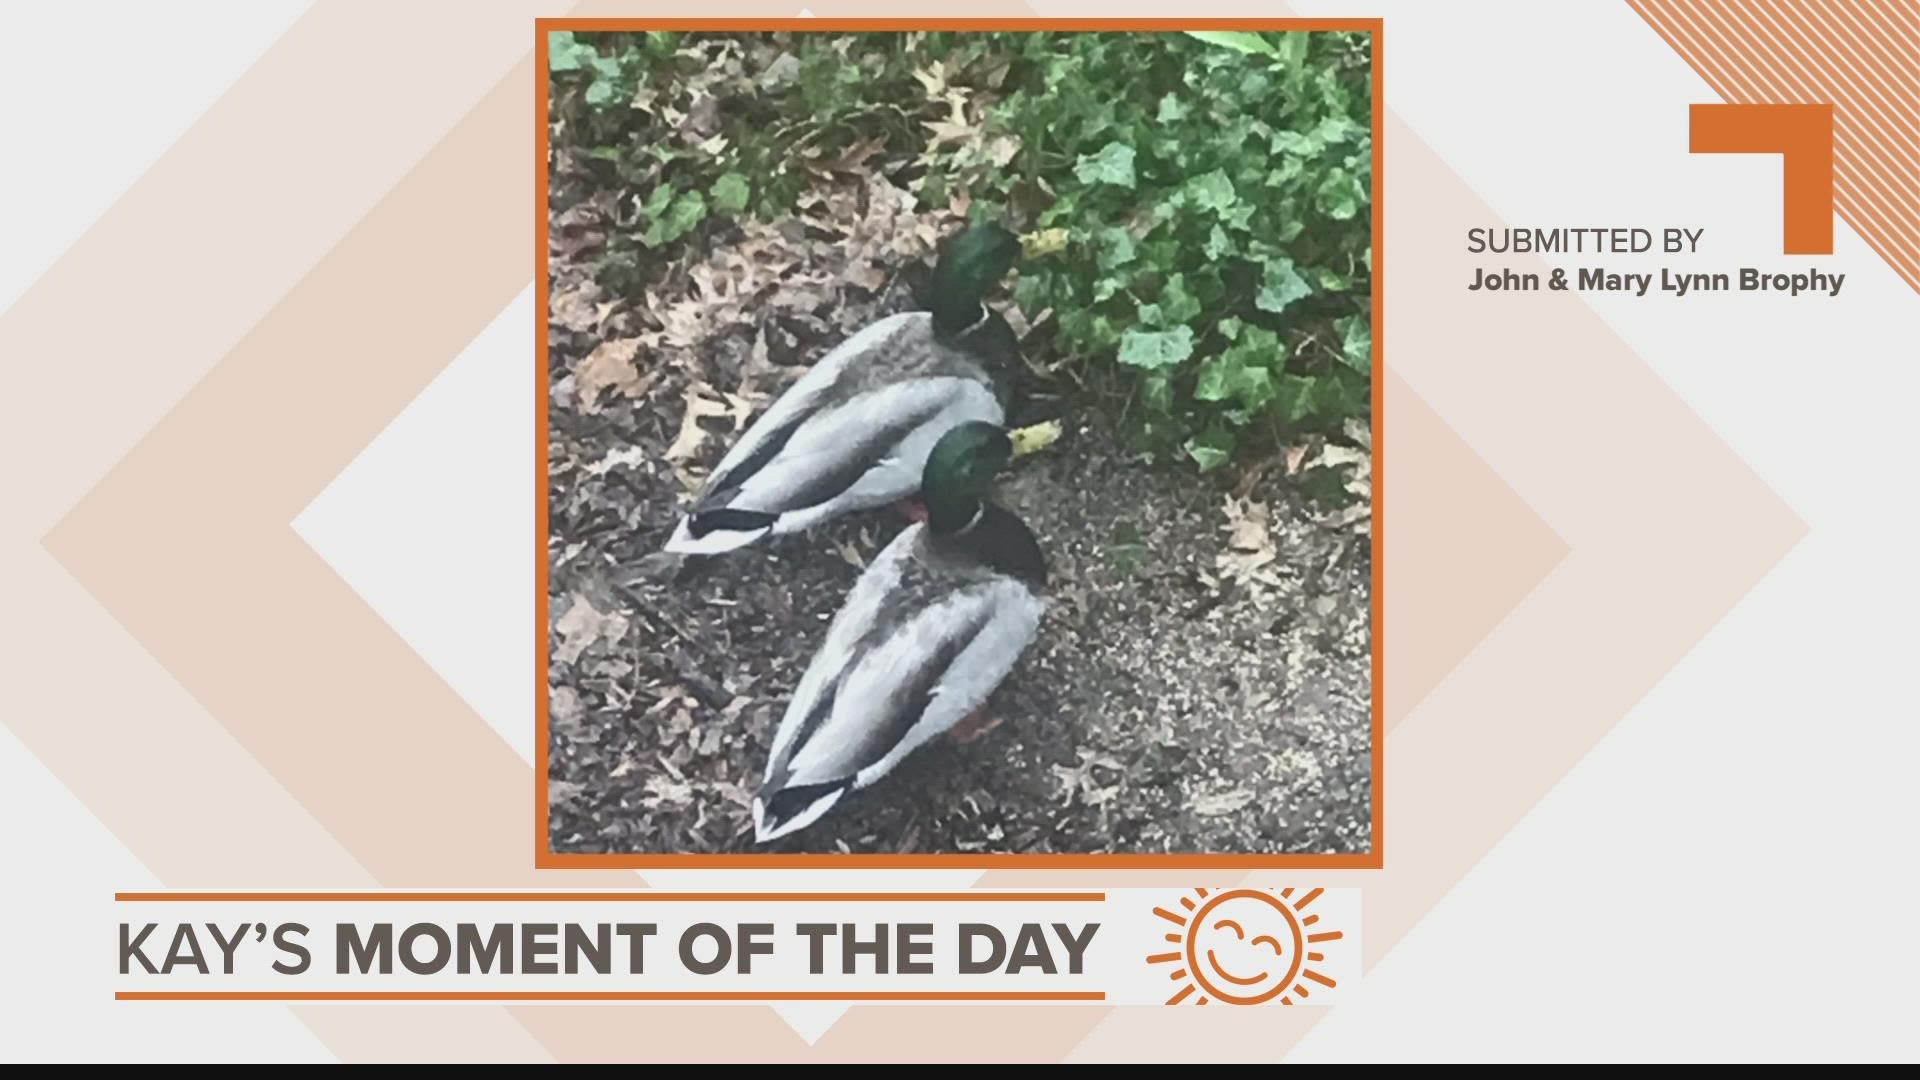 Kay's Moment of the Day for April 20